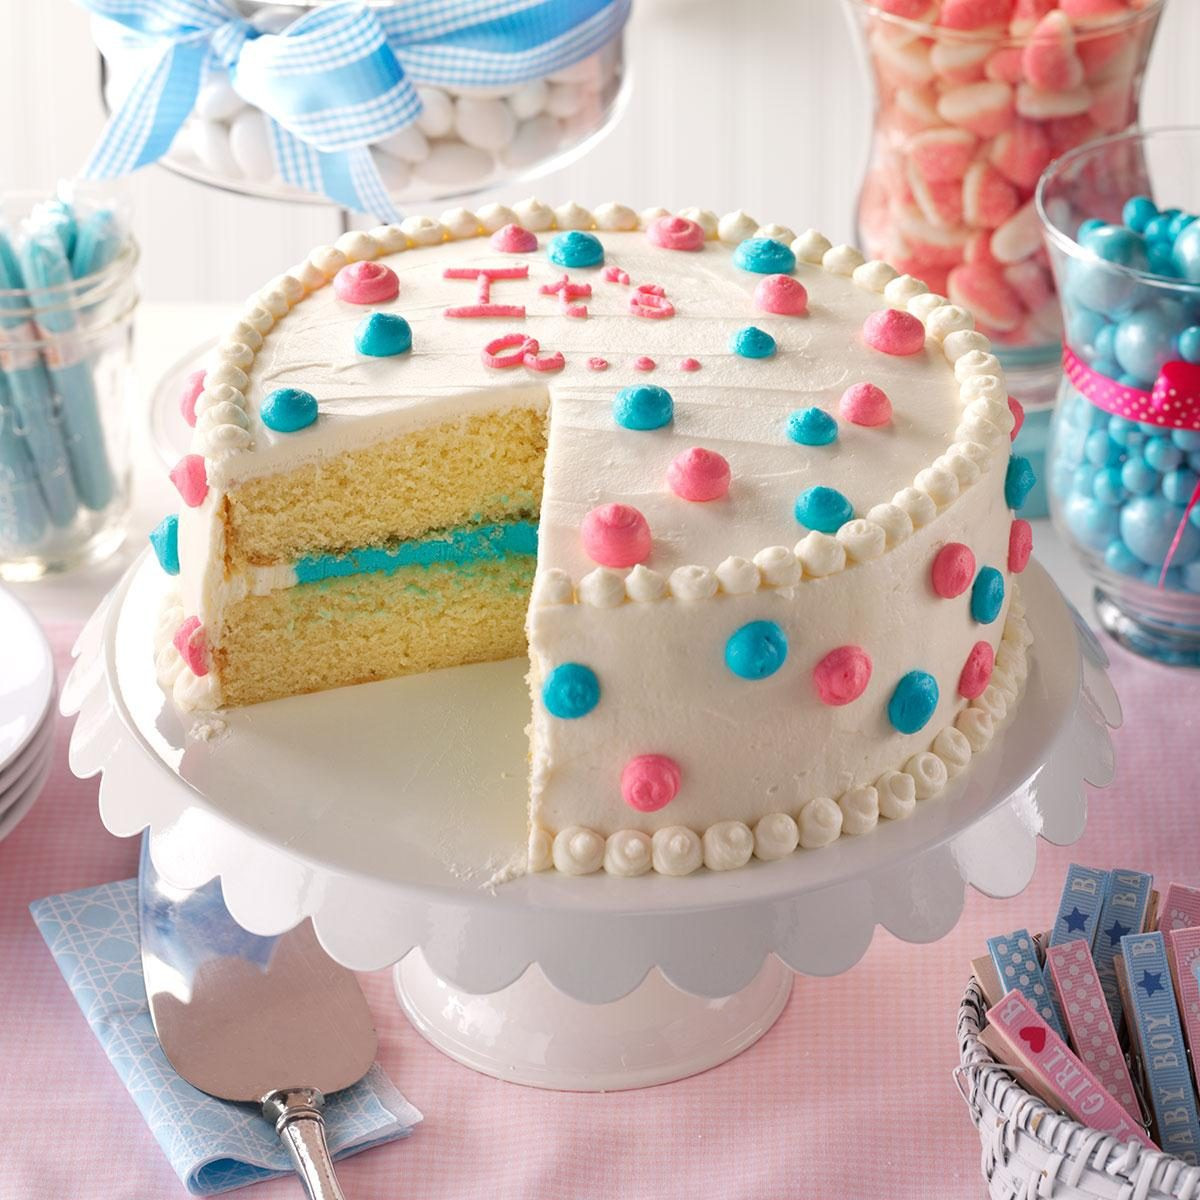 Cake Ideas For Gender Reveal Party
 The Cutest Gender Reveal Party Food Ideas